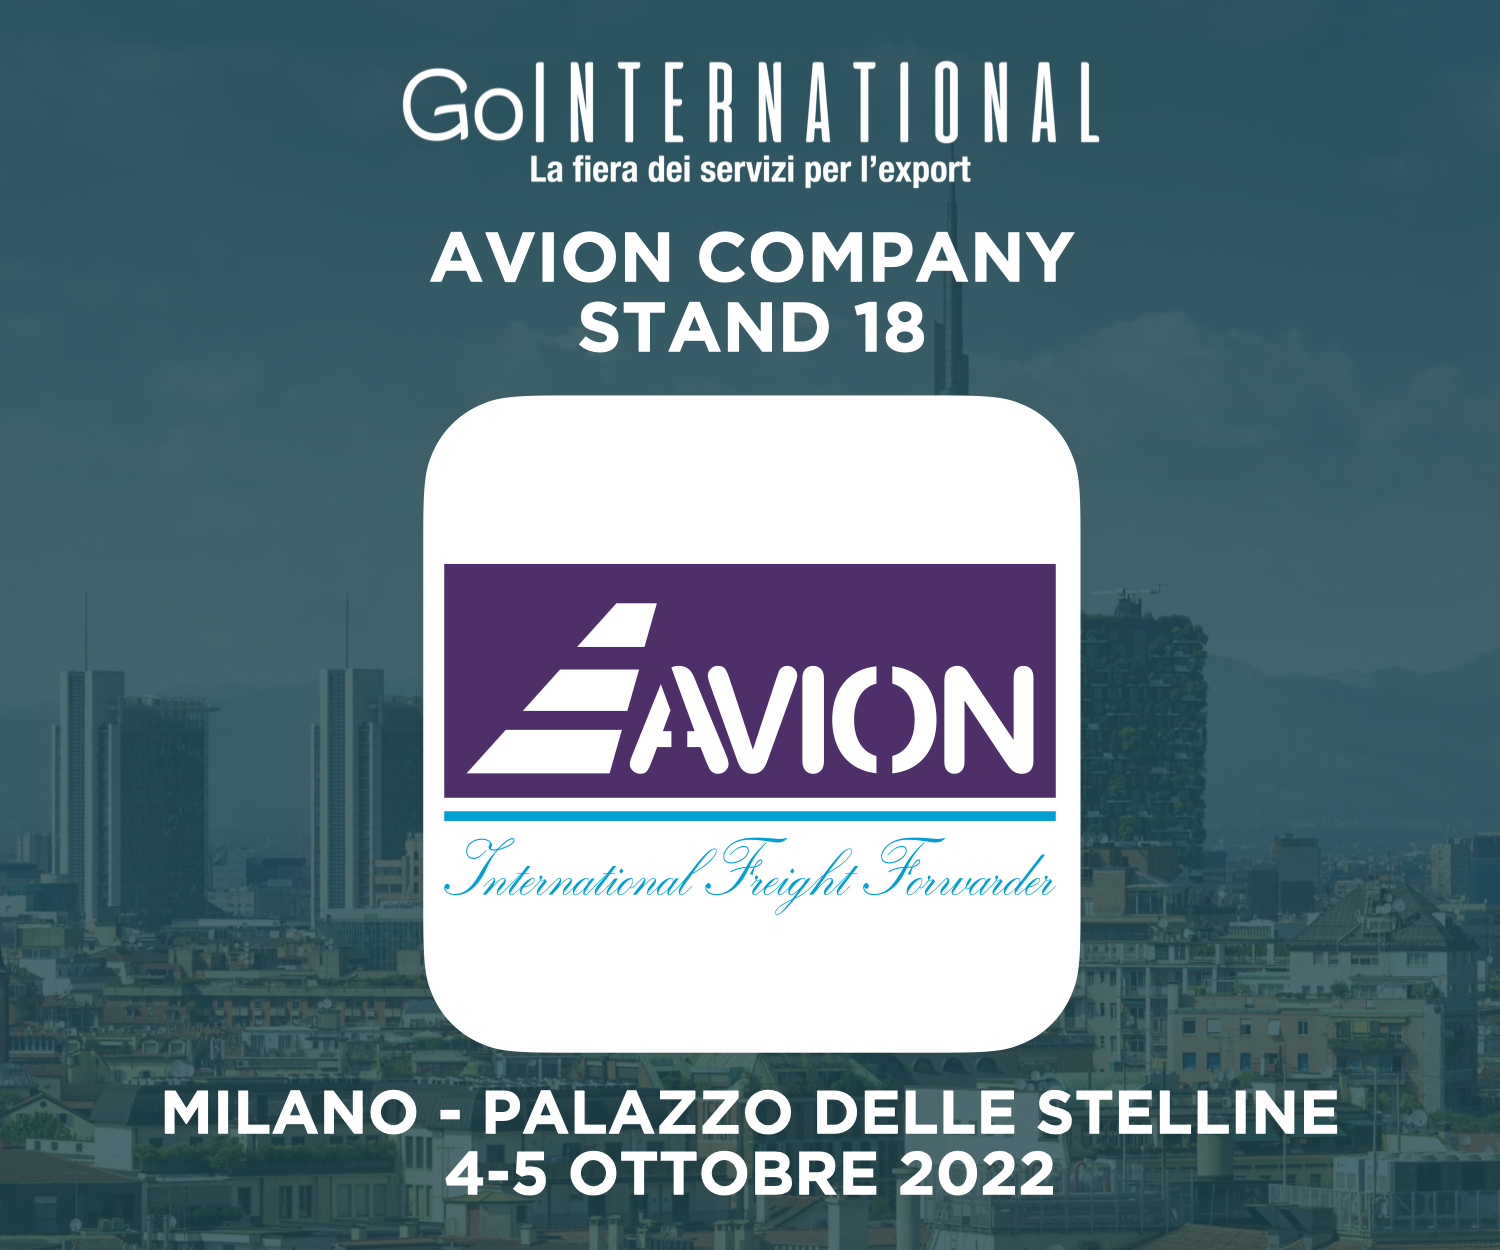 Here you can register to the Avion workshop at the fair Go International